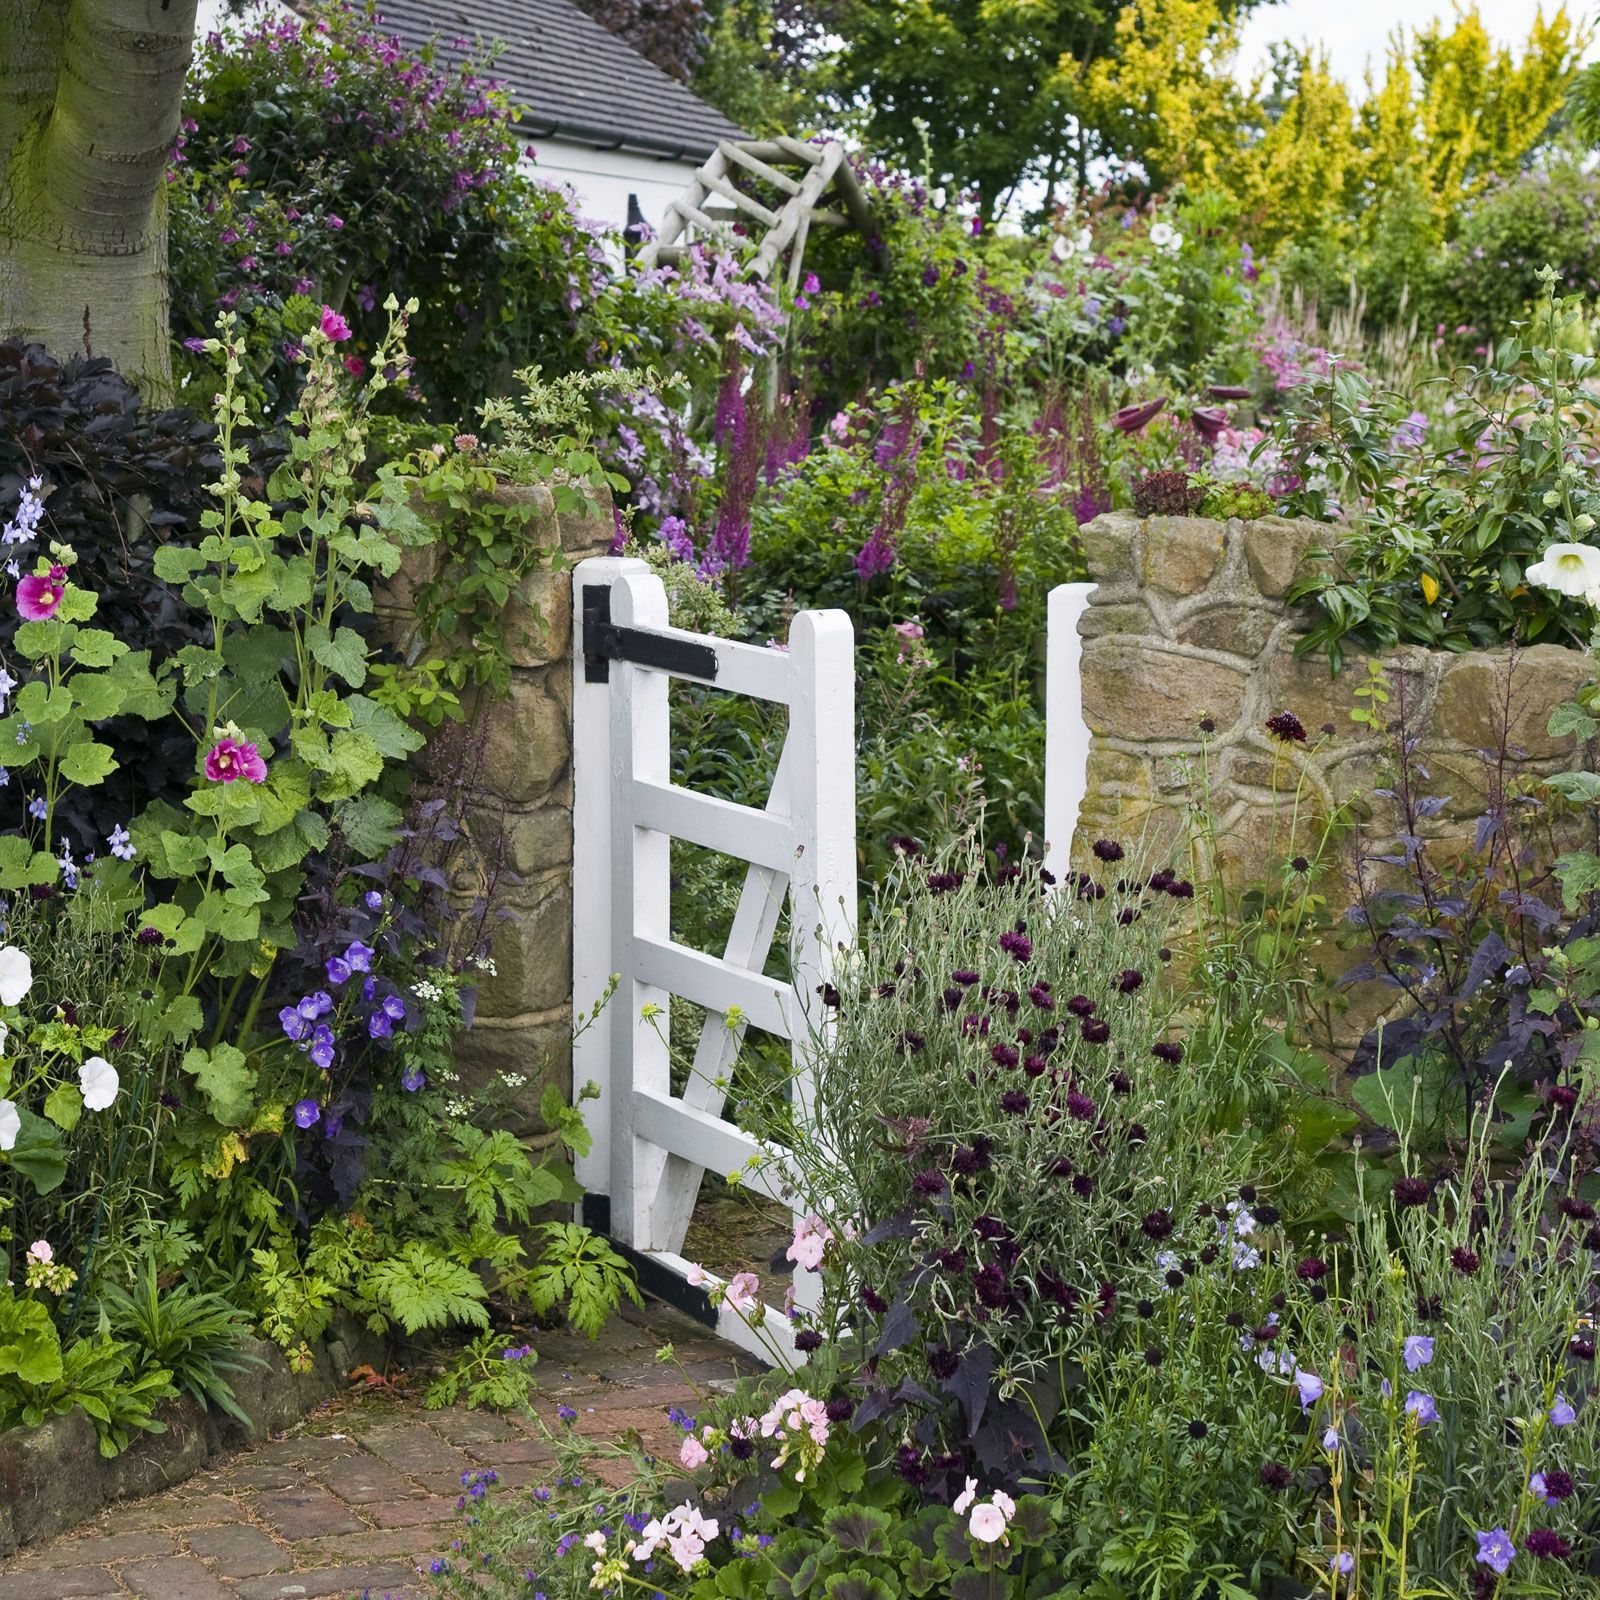 The secret to a cottage-style garden is to create an informal yet inviting landscape through overflowing flowerbeds of varying